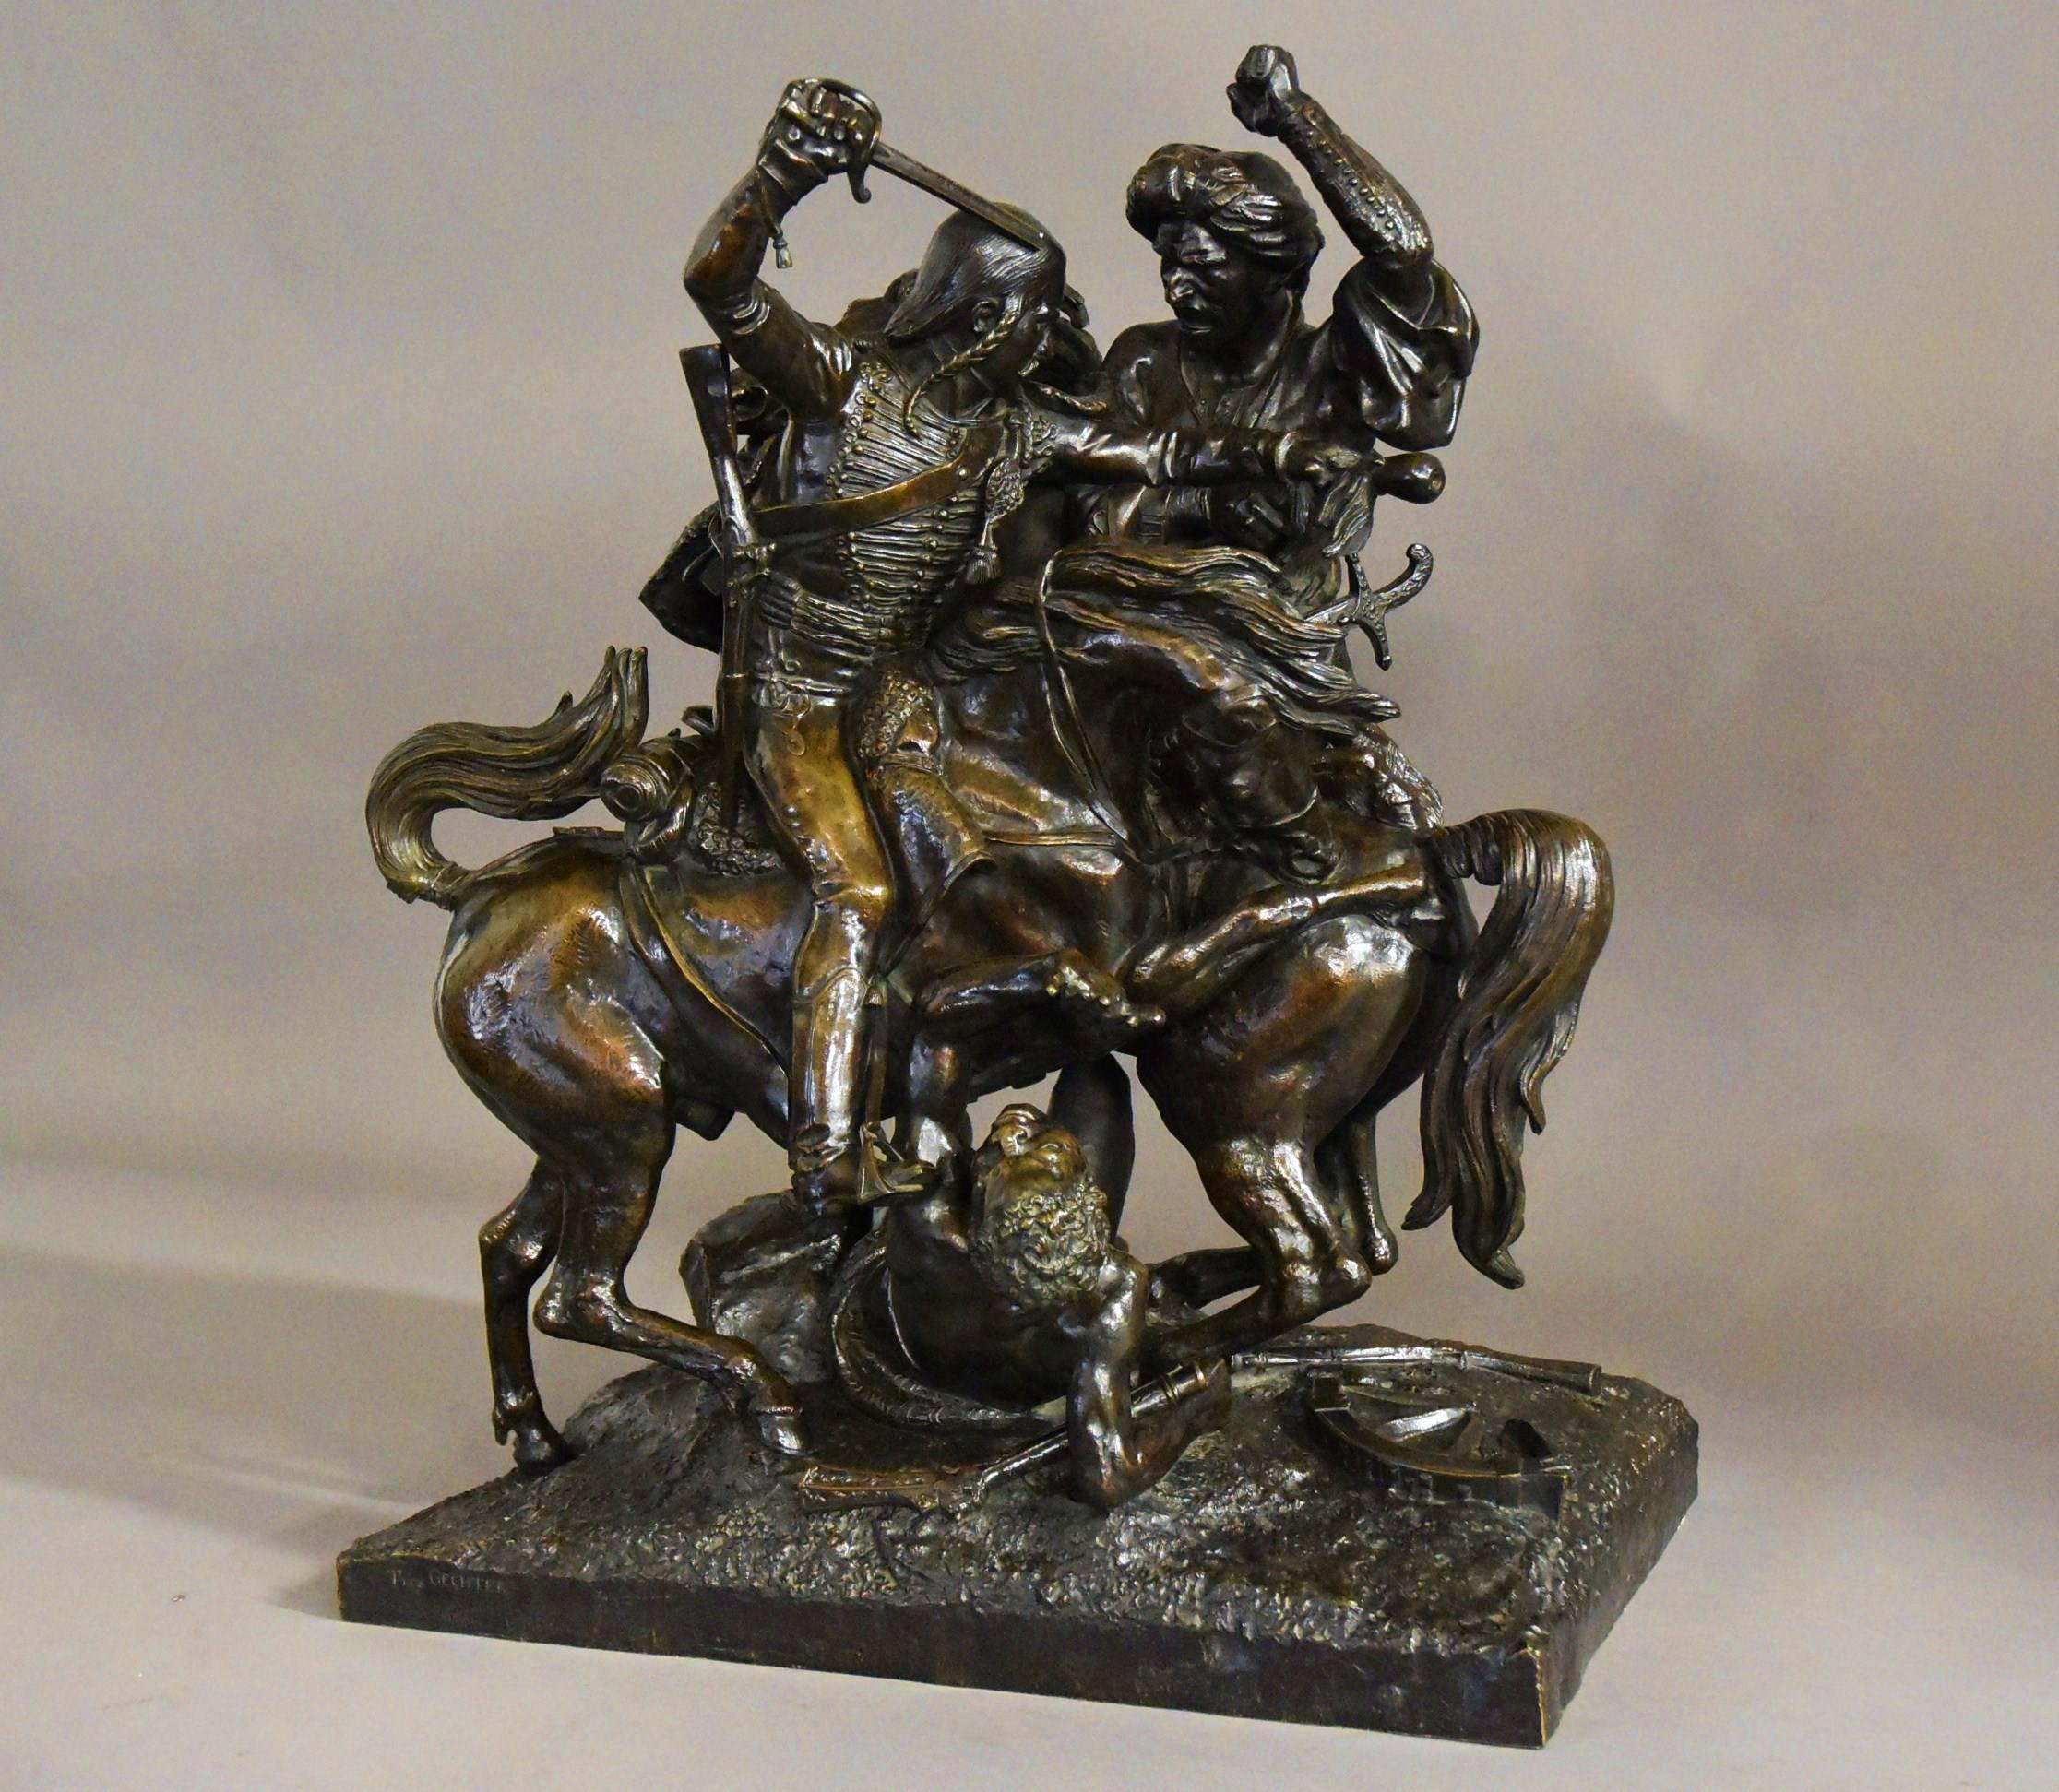 A large fine quality patinated bronze sculpture titled 'Aboukir' by Jean Francois Theodore Gechter (1796-1844).

The subject of the bronze is the battle of Aboukir, Egypt which took place in 1799, it consists of two figures mounted on horseback